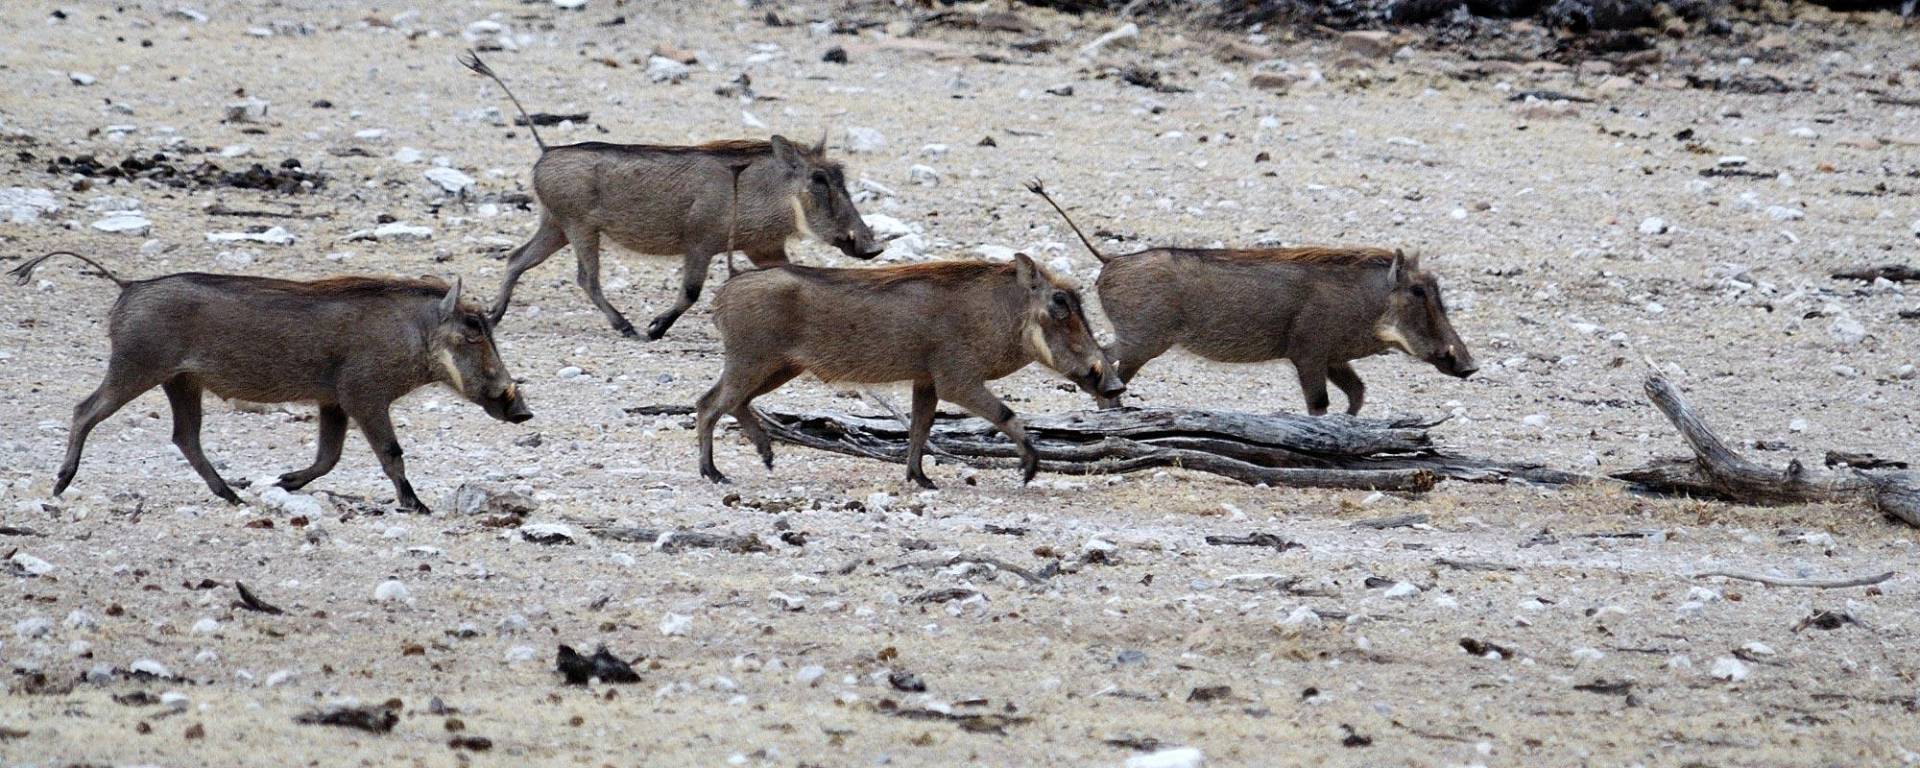 Warthogs on the way to the waterhole